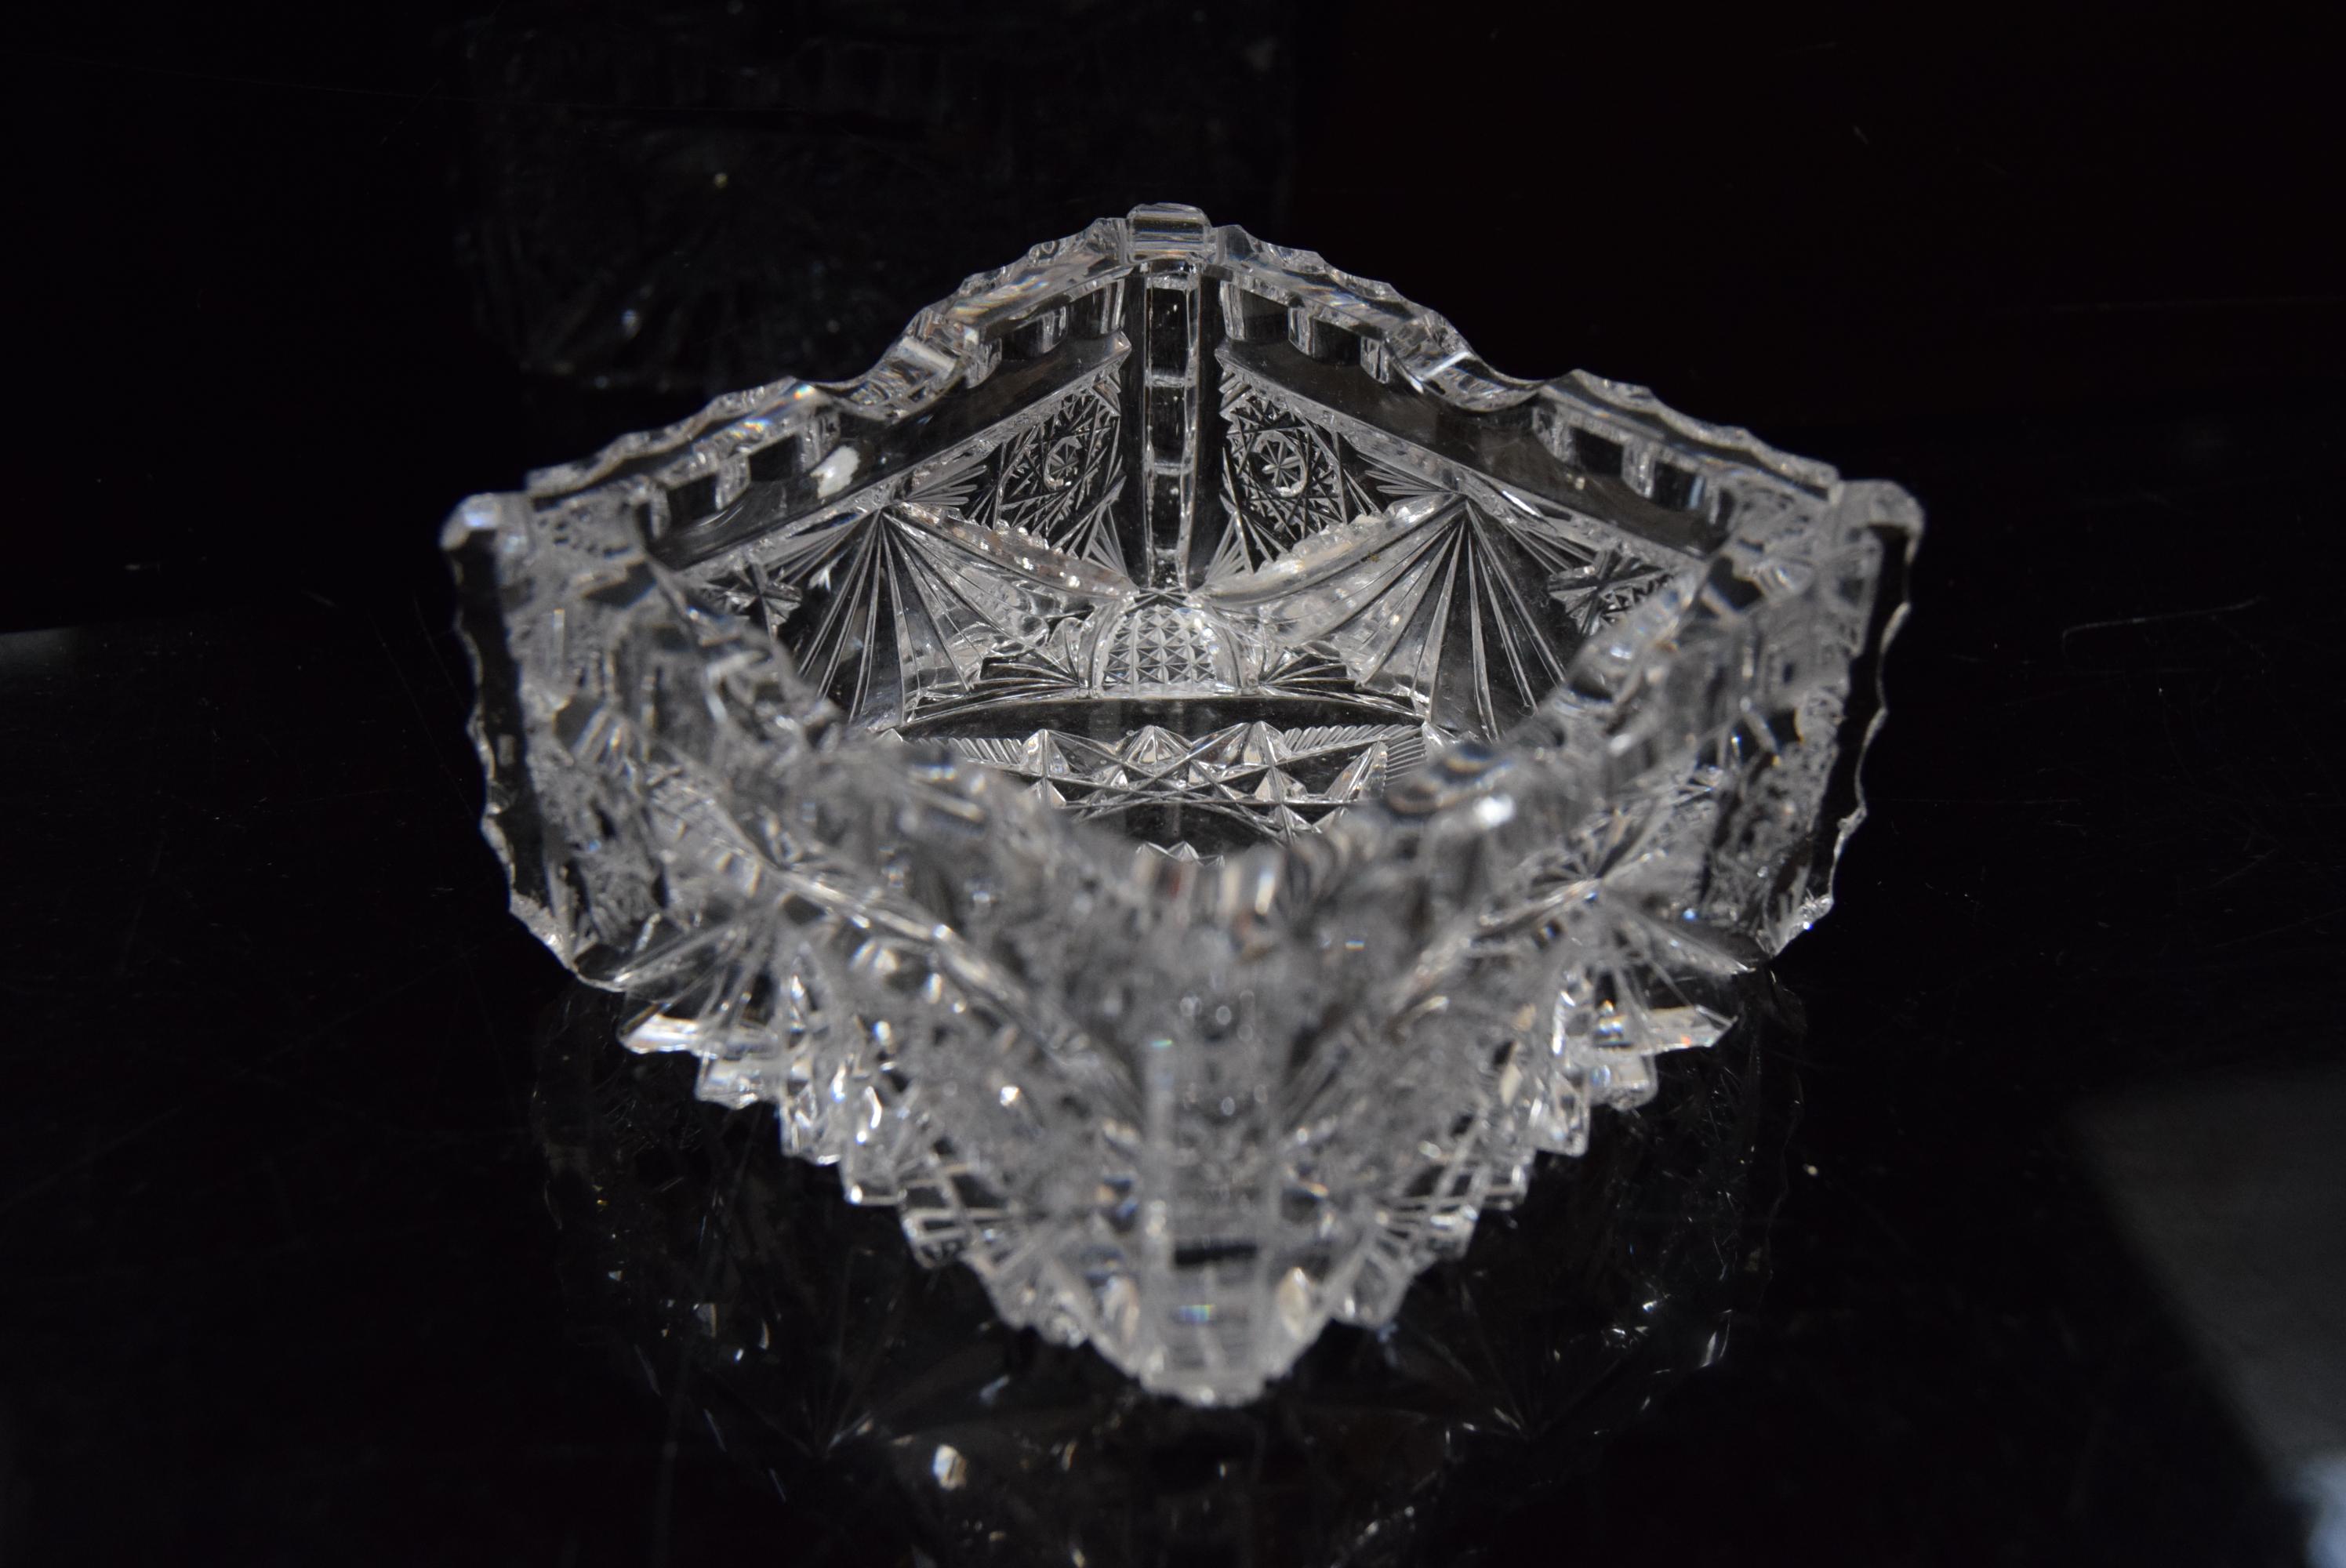 Pair of Rare Vintage Ashtrays, Cut Crystal Glass, Bohemia in the, 1960s For Sale 4